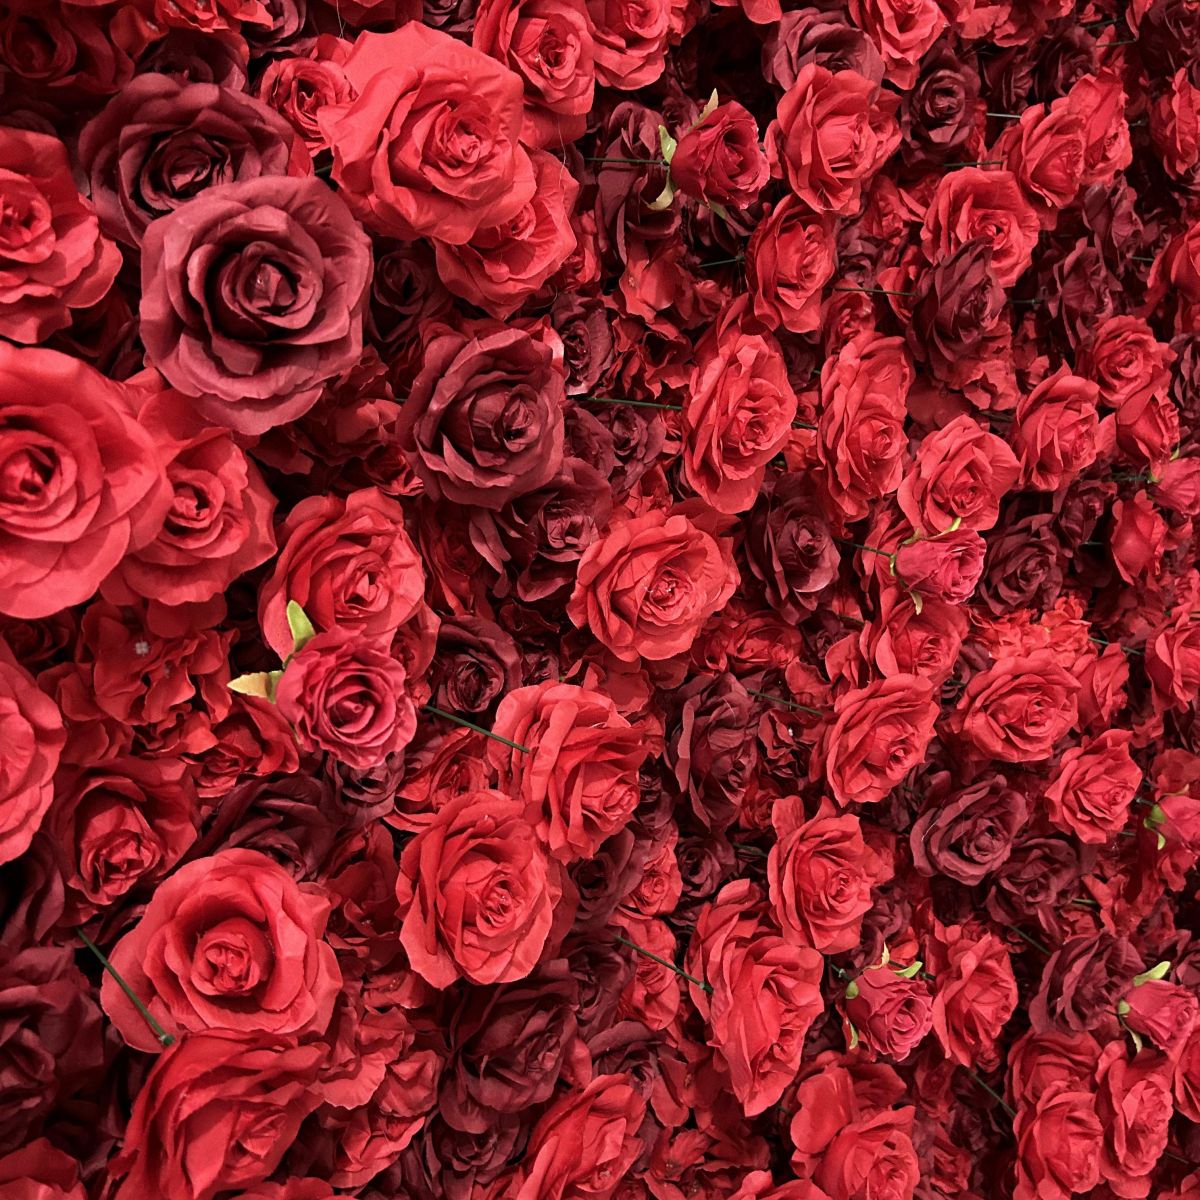 The heart shaped red rose flower wall looks vivid and lifelike.